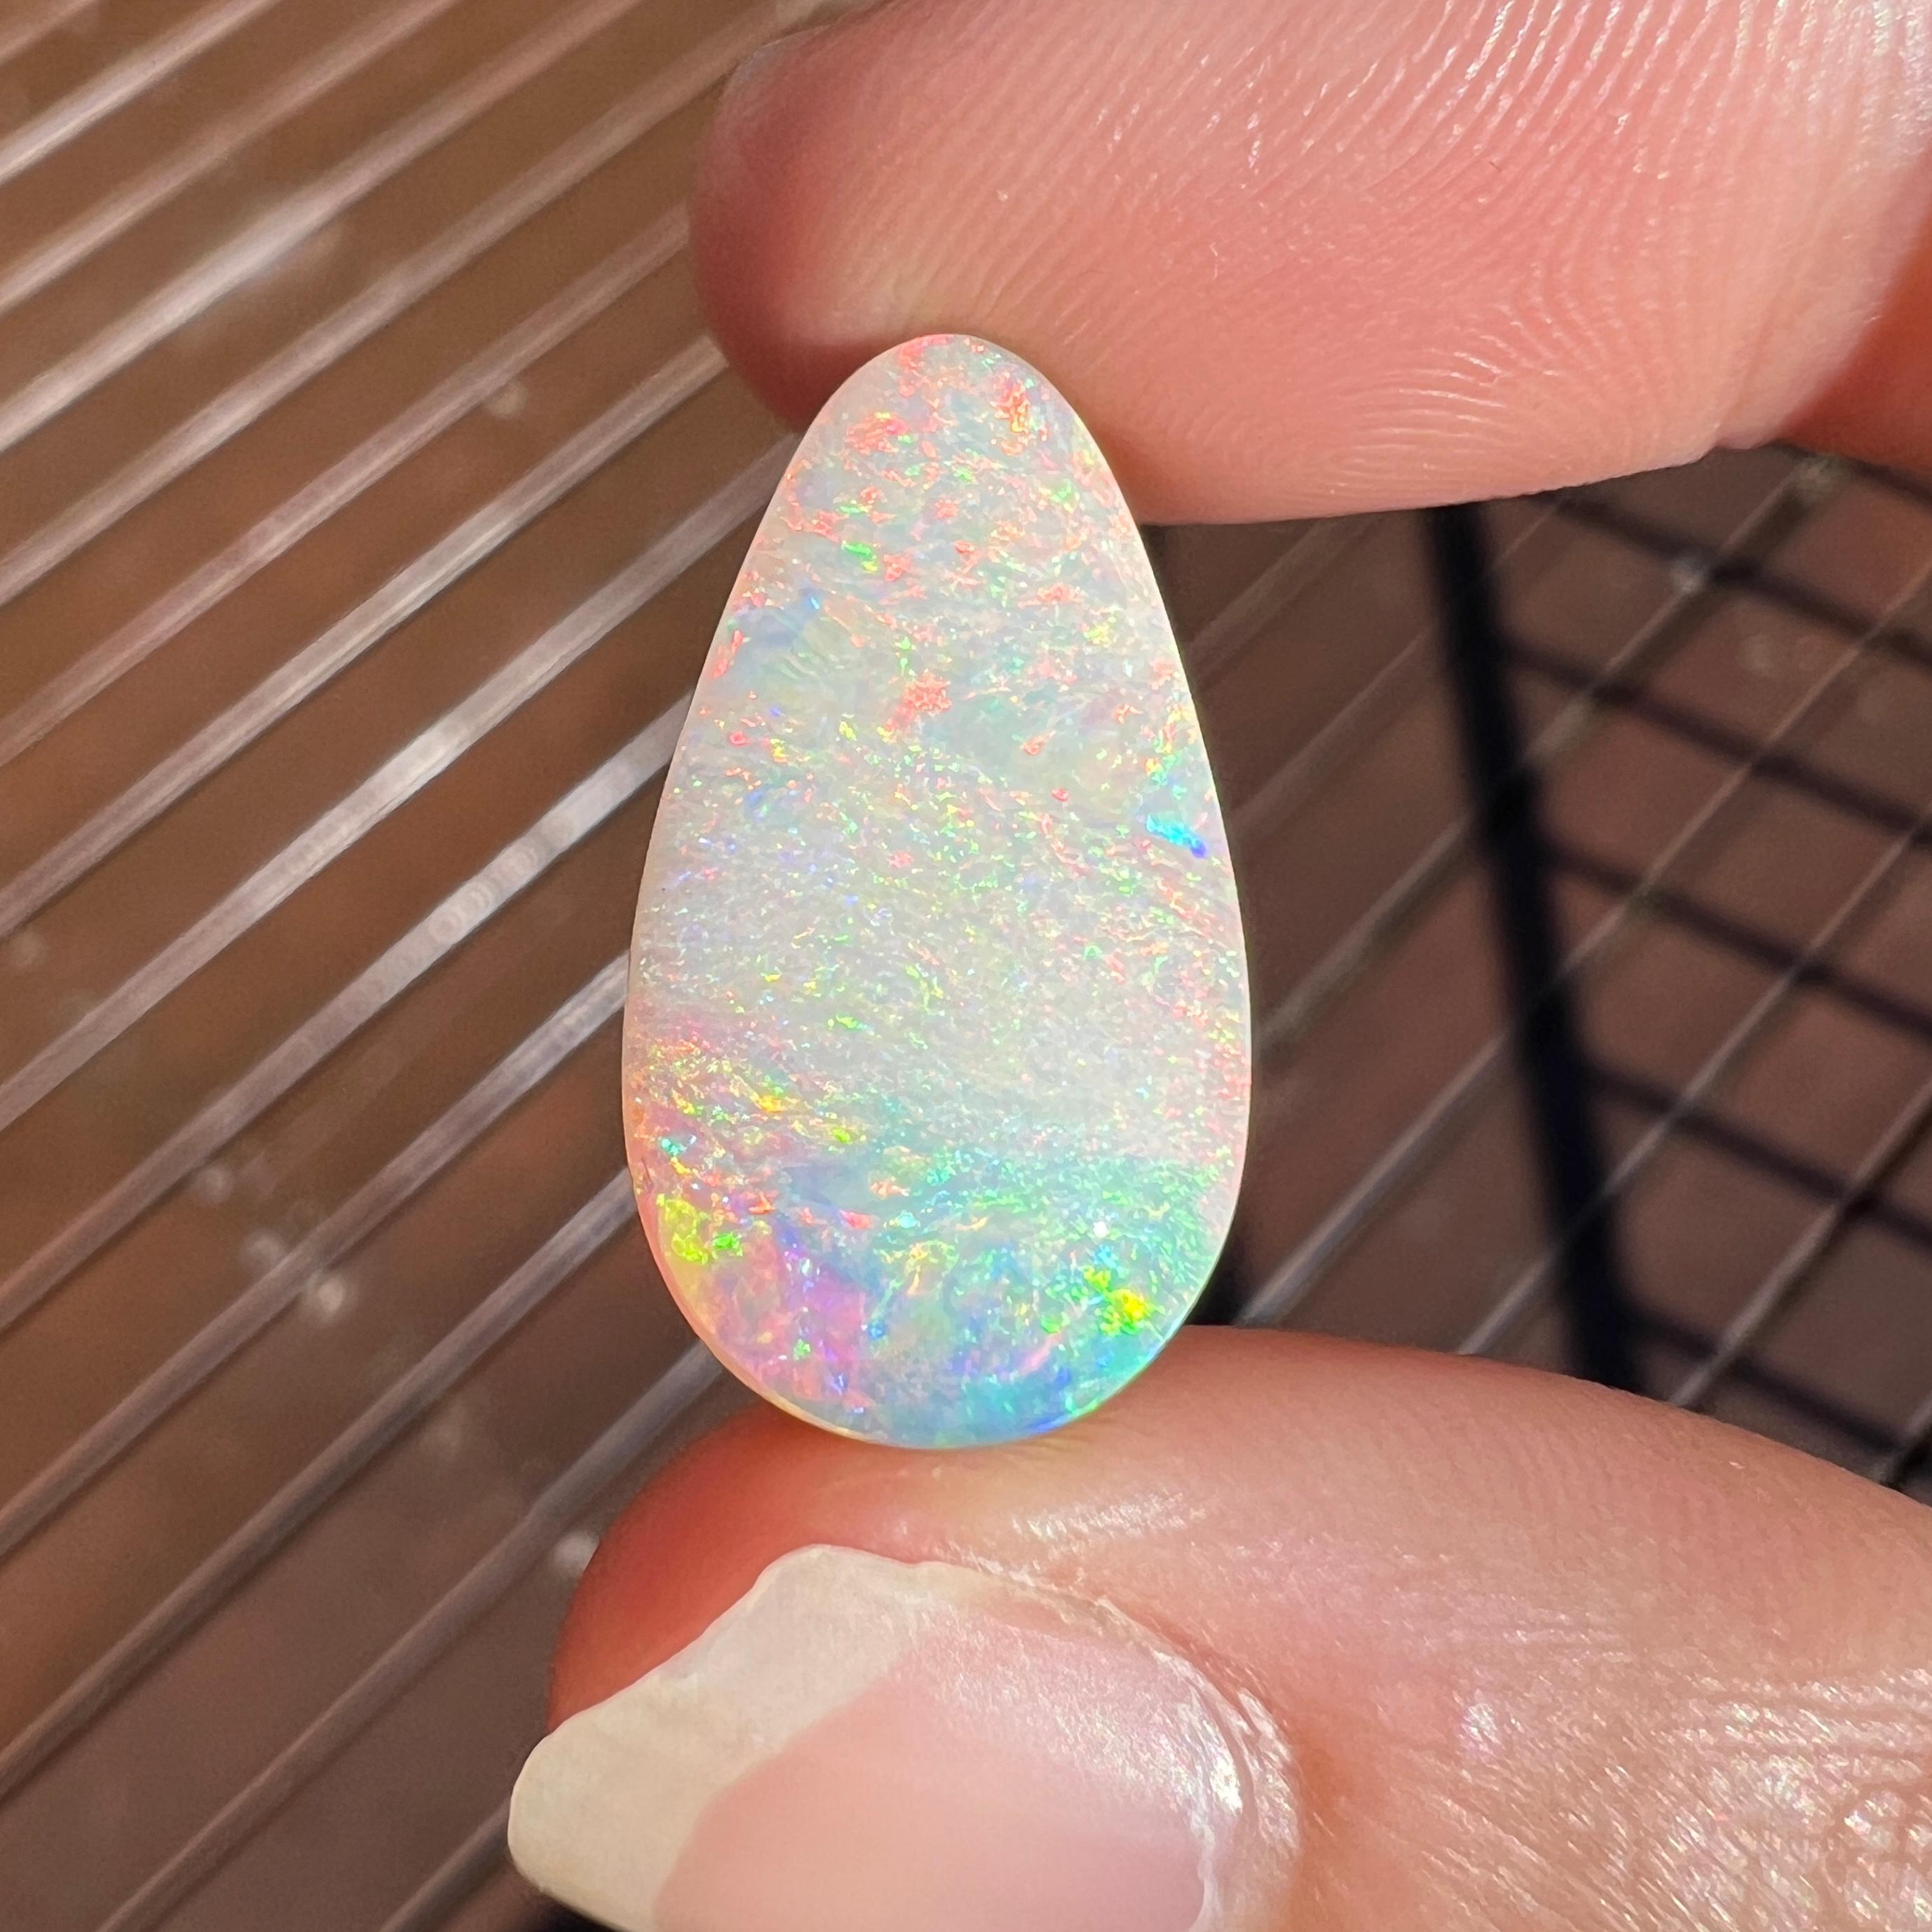 This lovely 9.42 Ct Australian boulder opal was mined by Sue Cooper at her Yaraka opal mine in western Queensland, Australia in 2022. Sue processed the rough opal herself and cut into into an elongated teardrop shape. We especially love the pink and